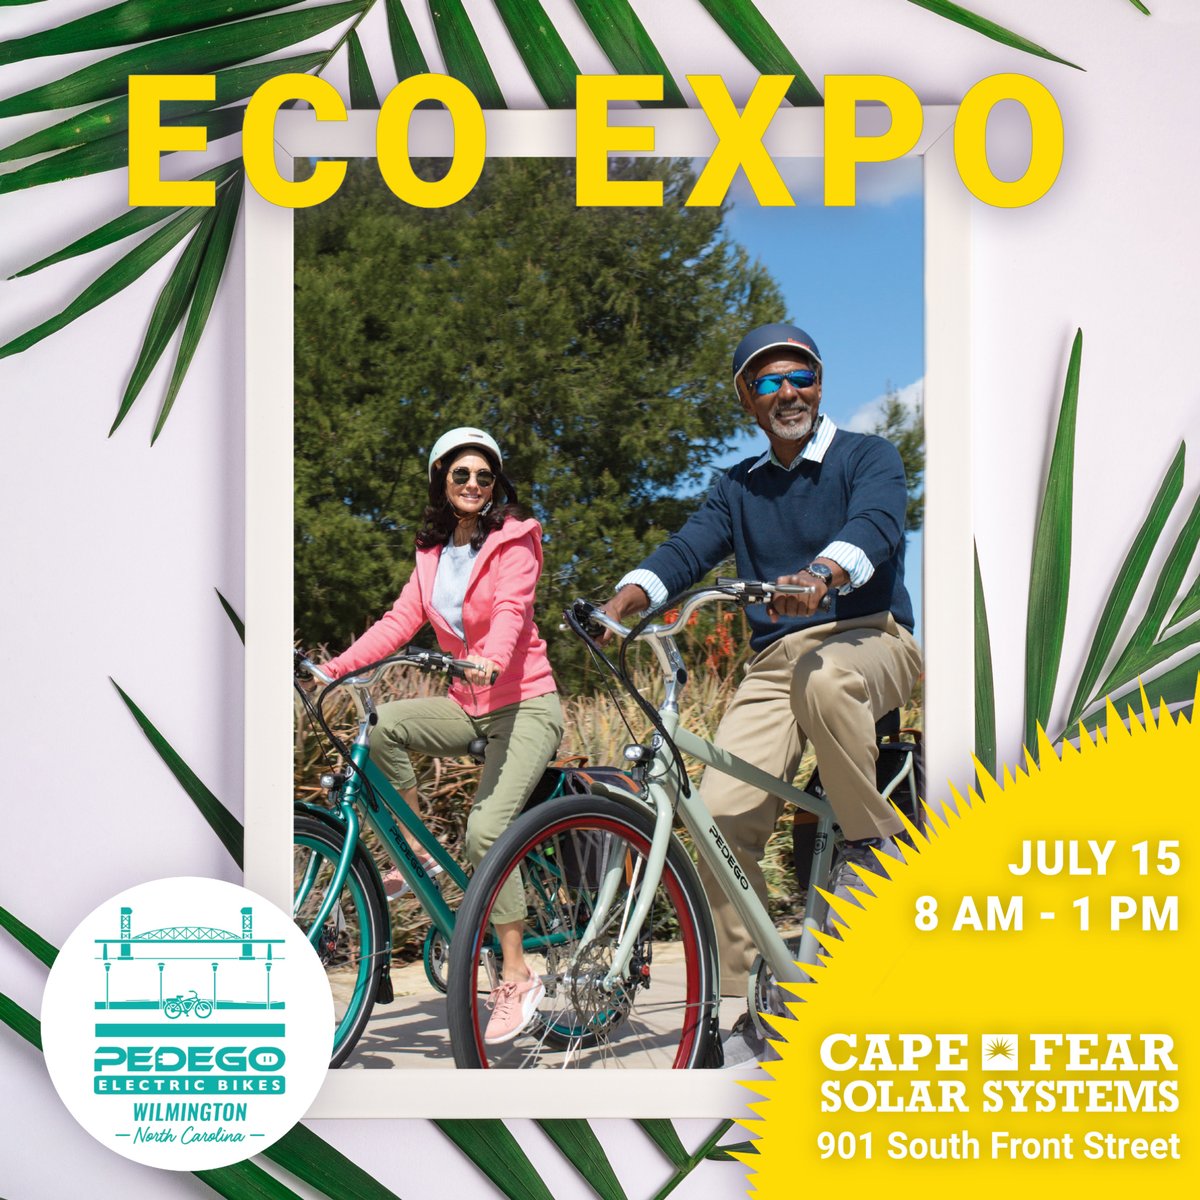 'Reducing your carbon footprint' doesn't mean limiting how far you can go! Swing by the Eco Expo this Saturday to learn more about Pedego Wilmington's e-bike sales, rentals, and servicing!

#ElectricBicycle #EBikes #CarbonReduction